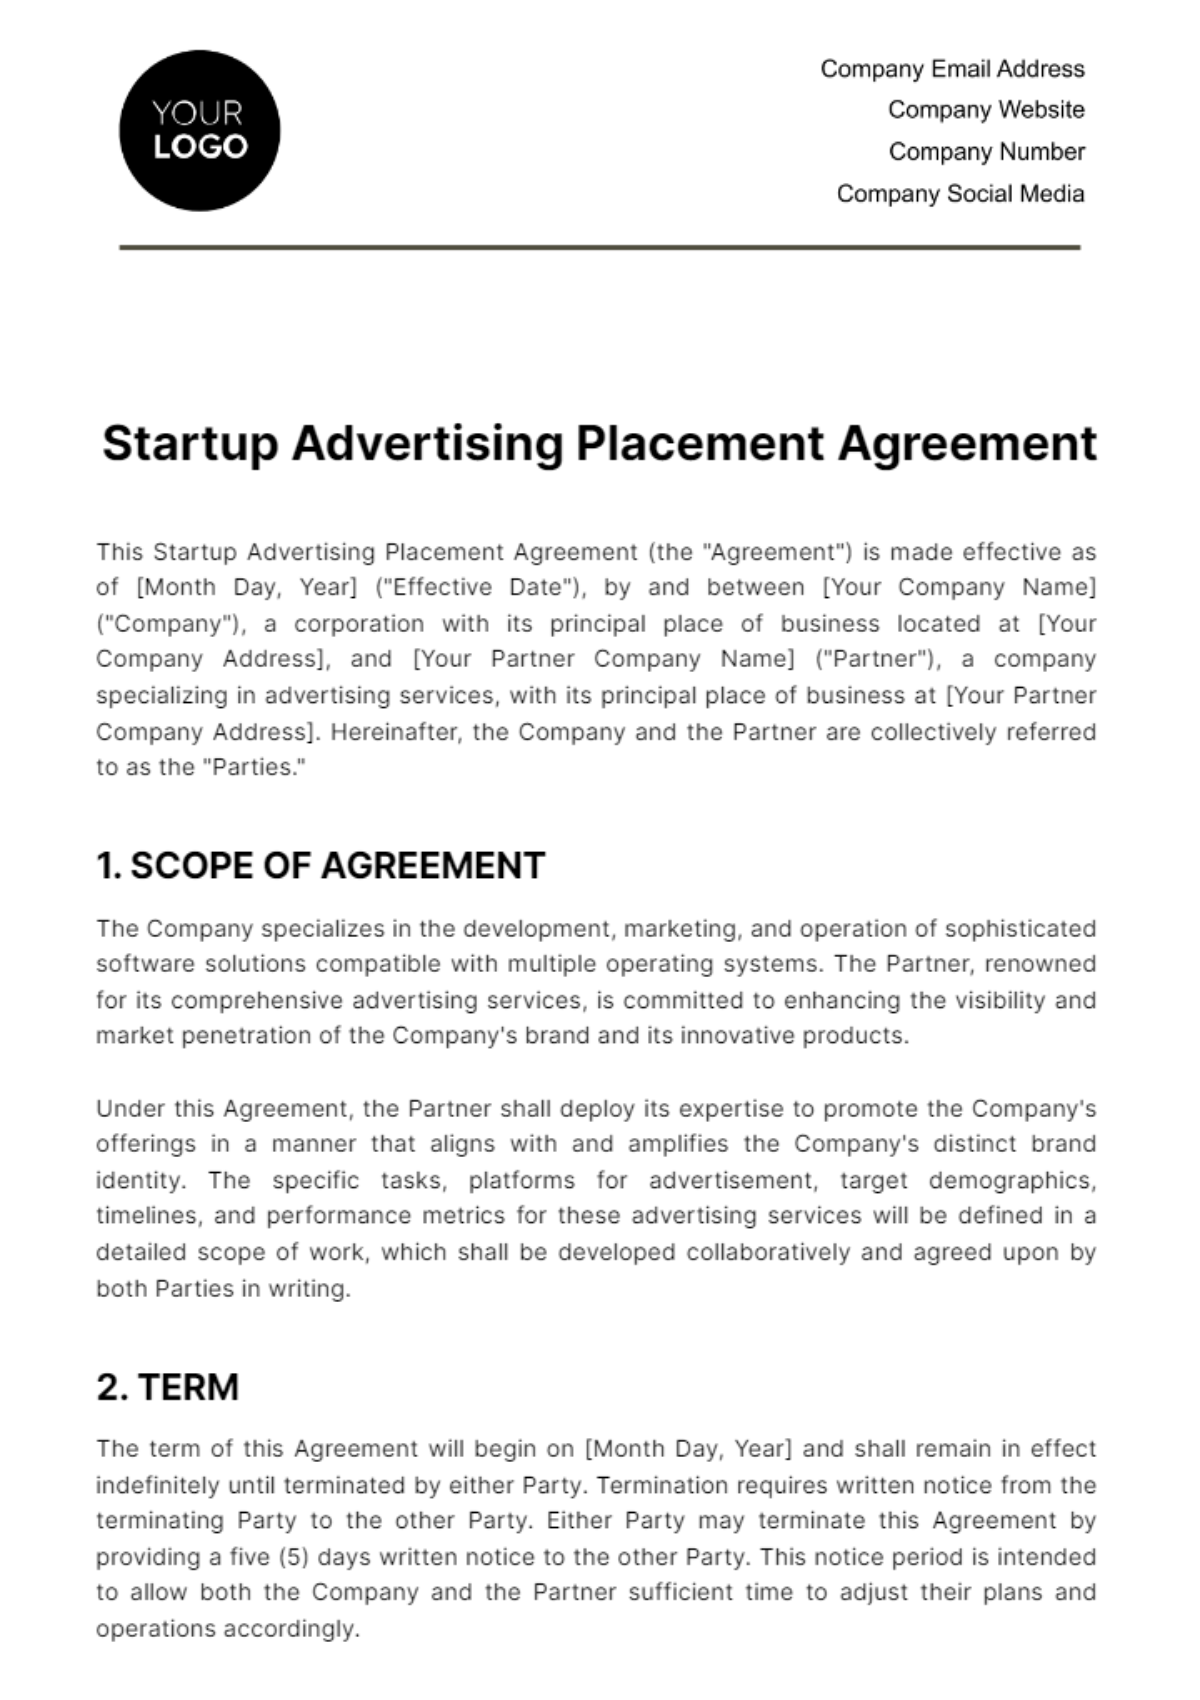 Free Startup Advertising Placement Agreement Template